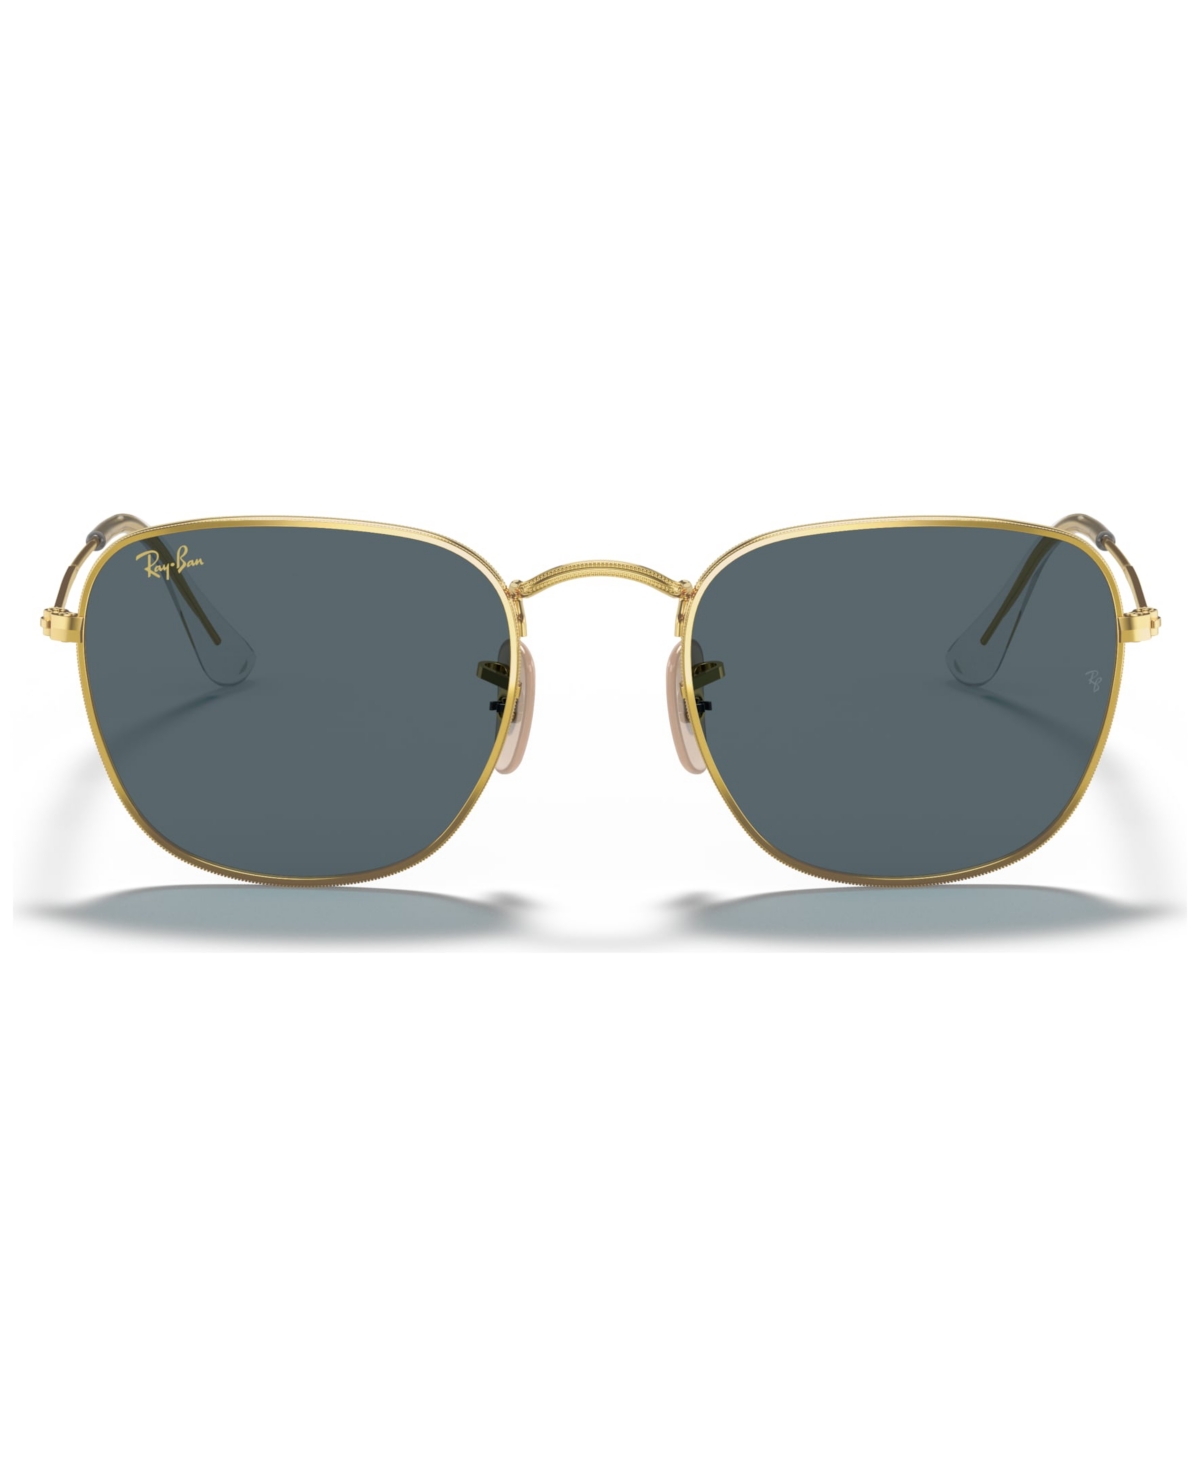 Ray Ban Unisex Sunglasses, Frank Rb3857 51 In Legend Gold,blue